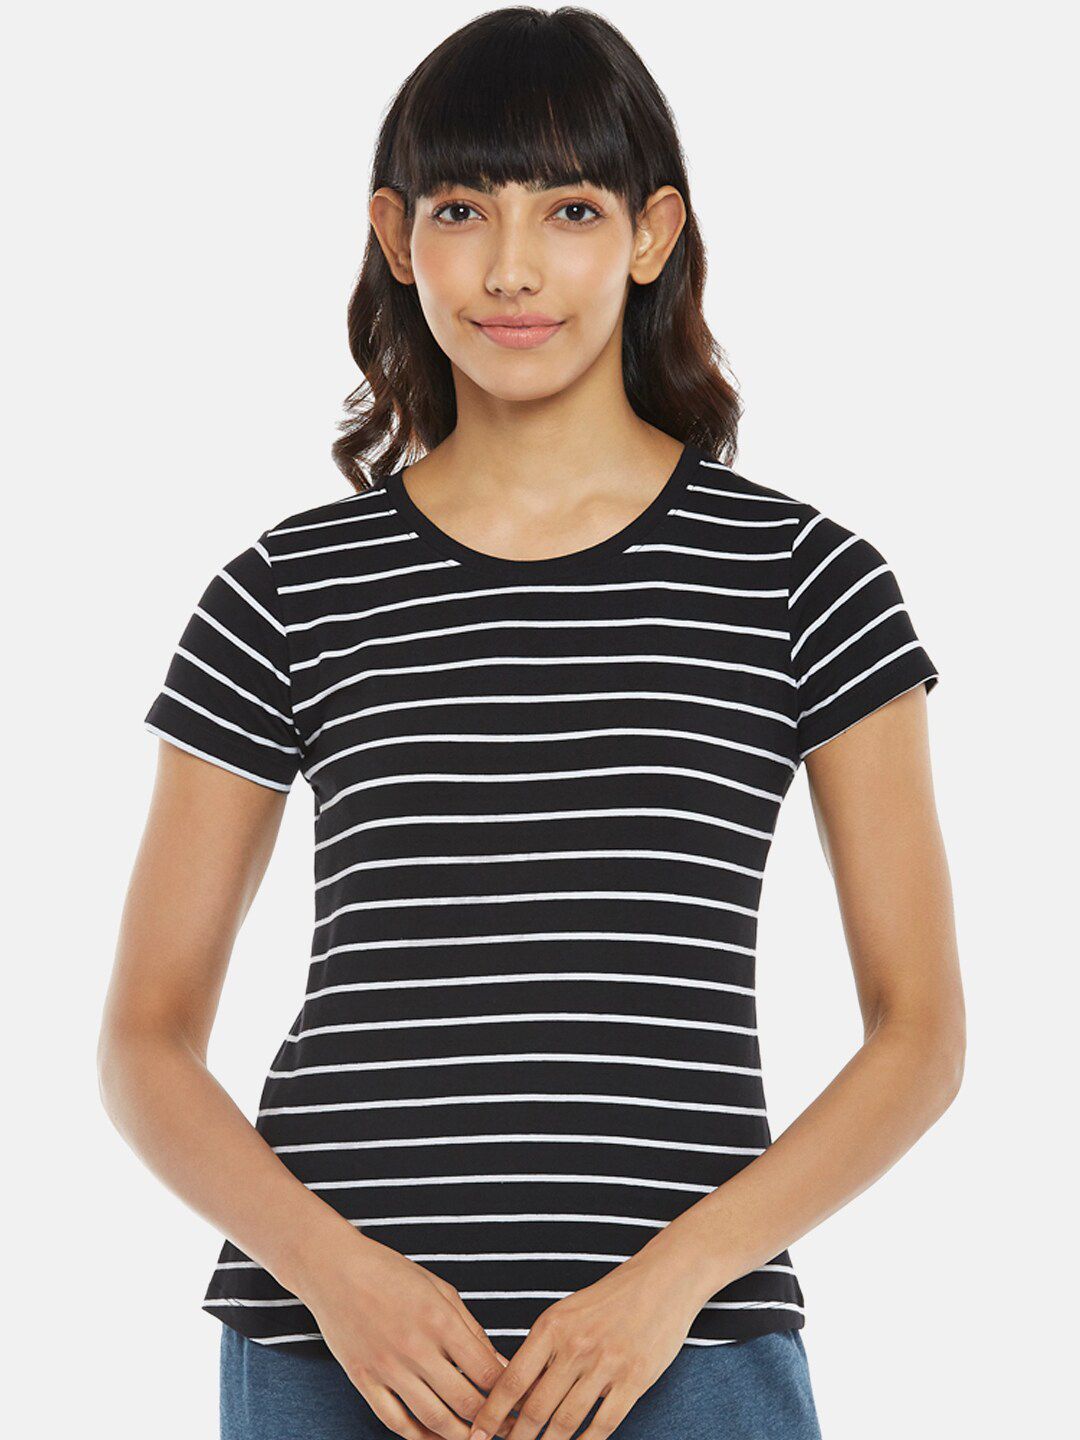 Dreamz by Pantaloons Black Striped Top Price in India